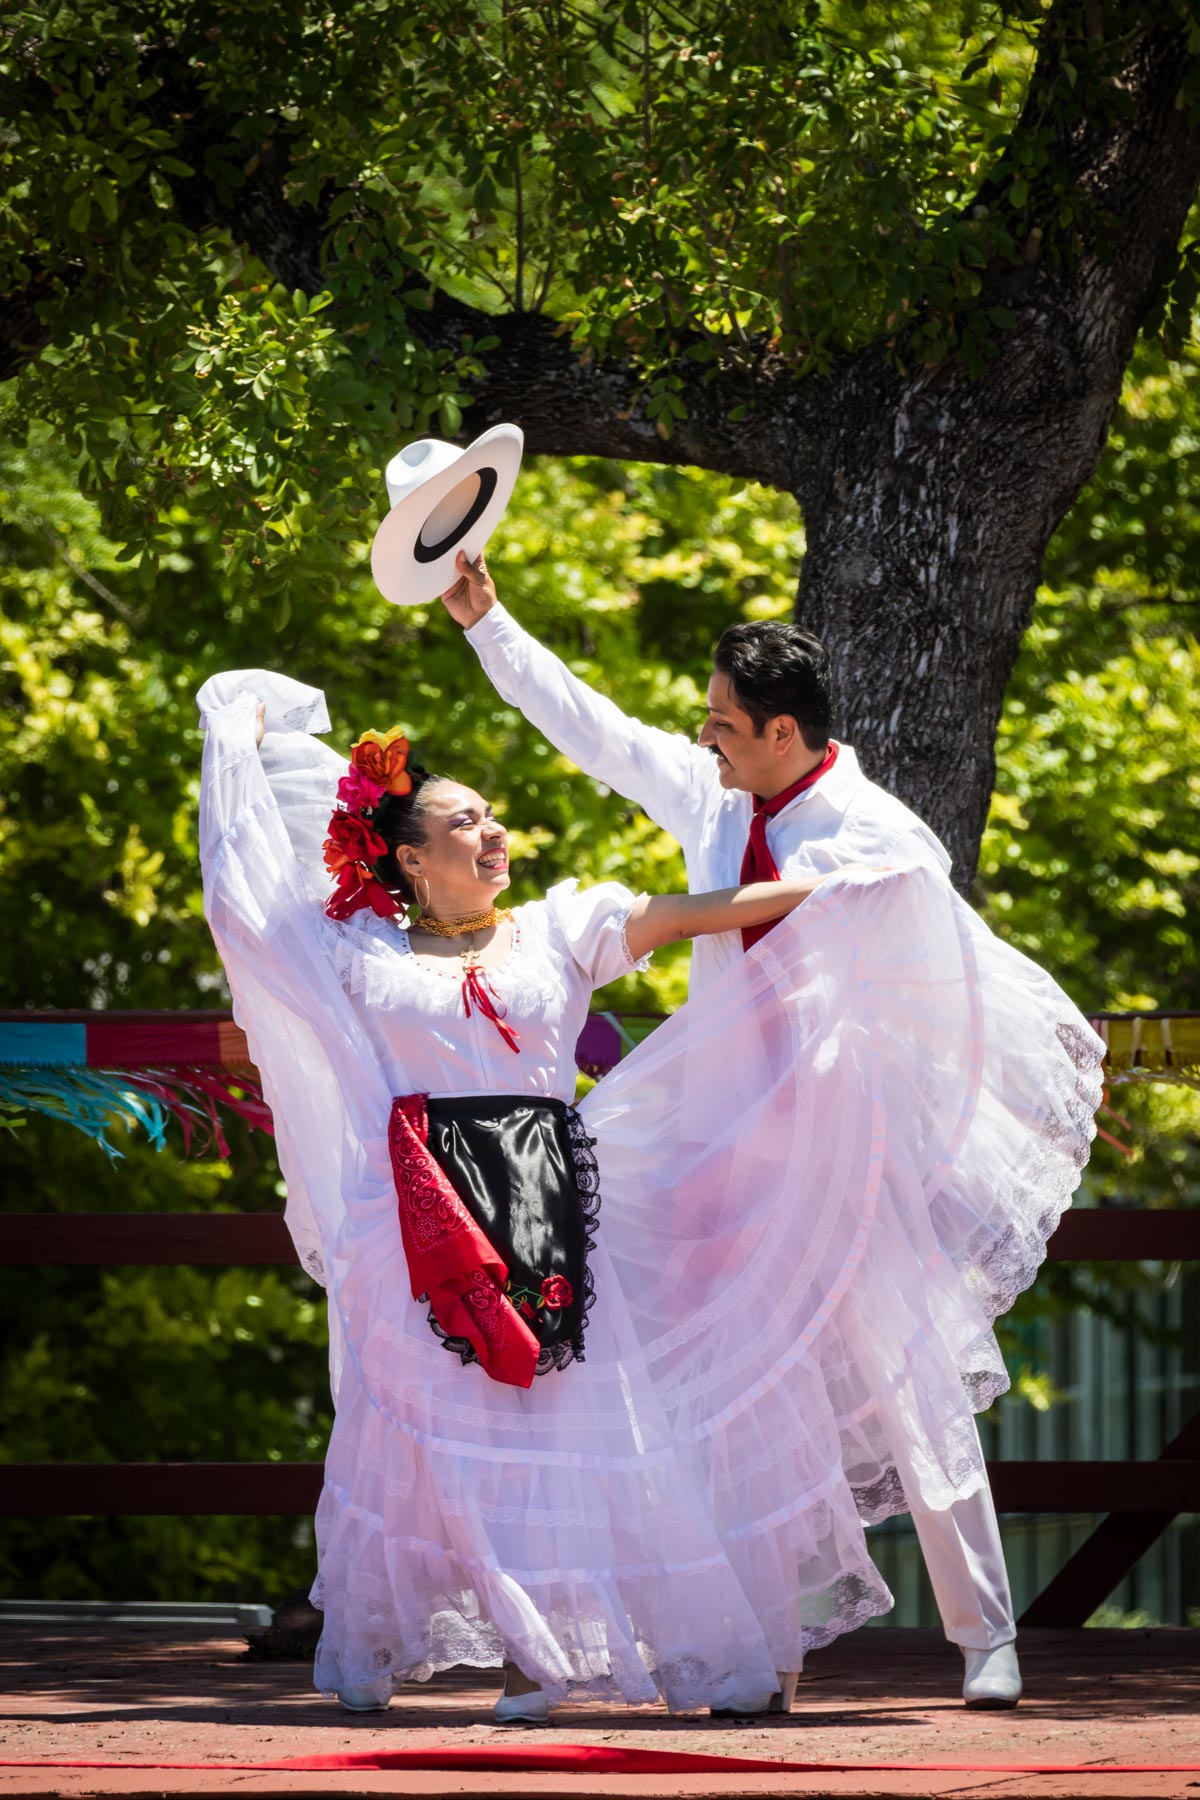 Dancers wearing white outfits during Day at Old Mexico for an article on the best Fiesta photos